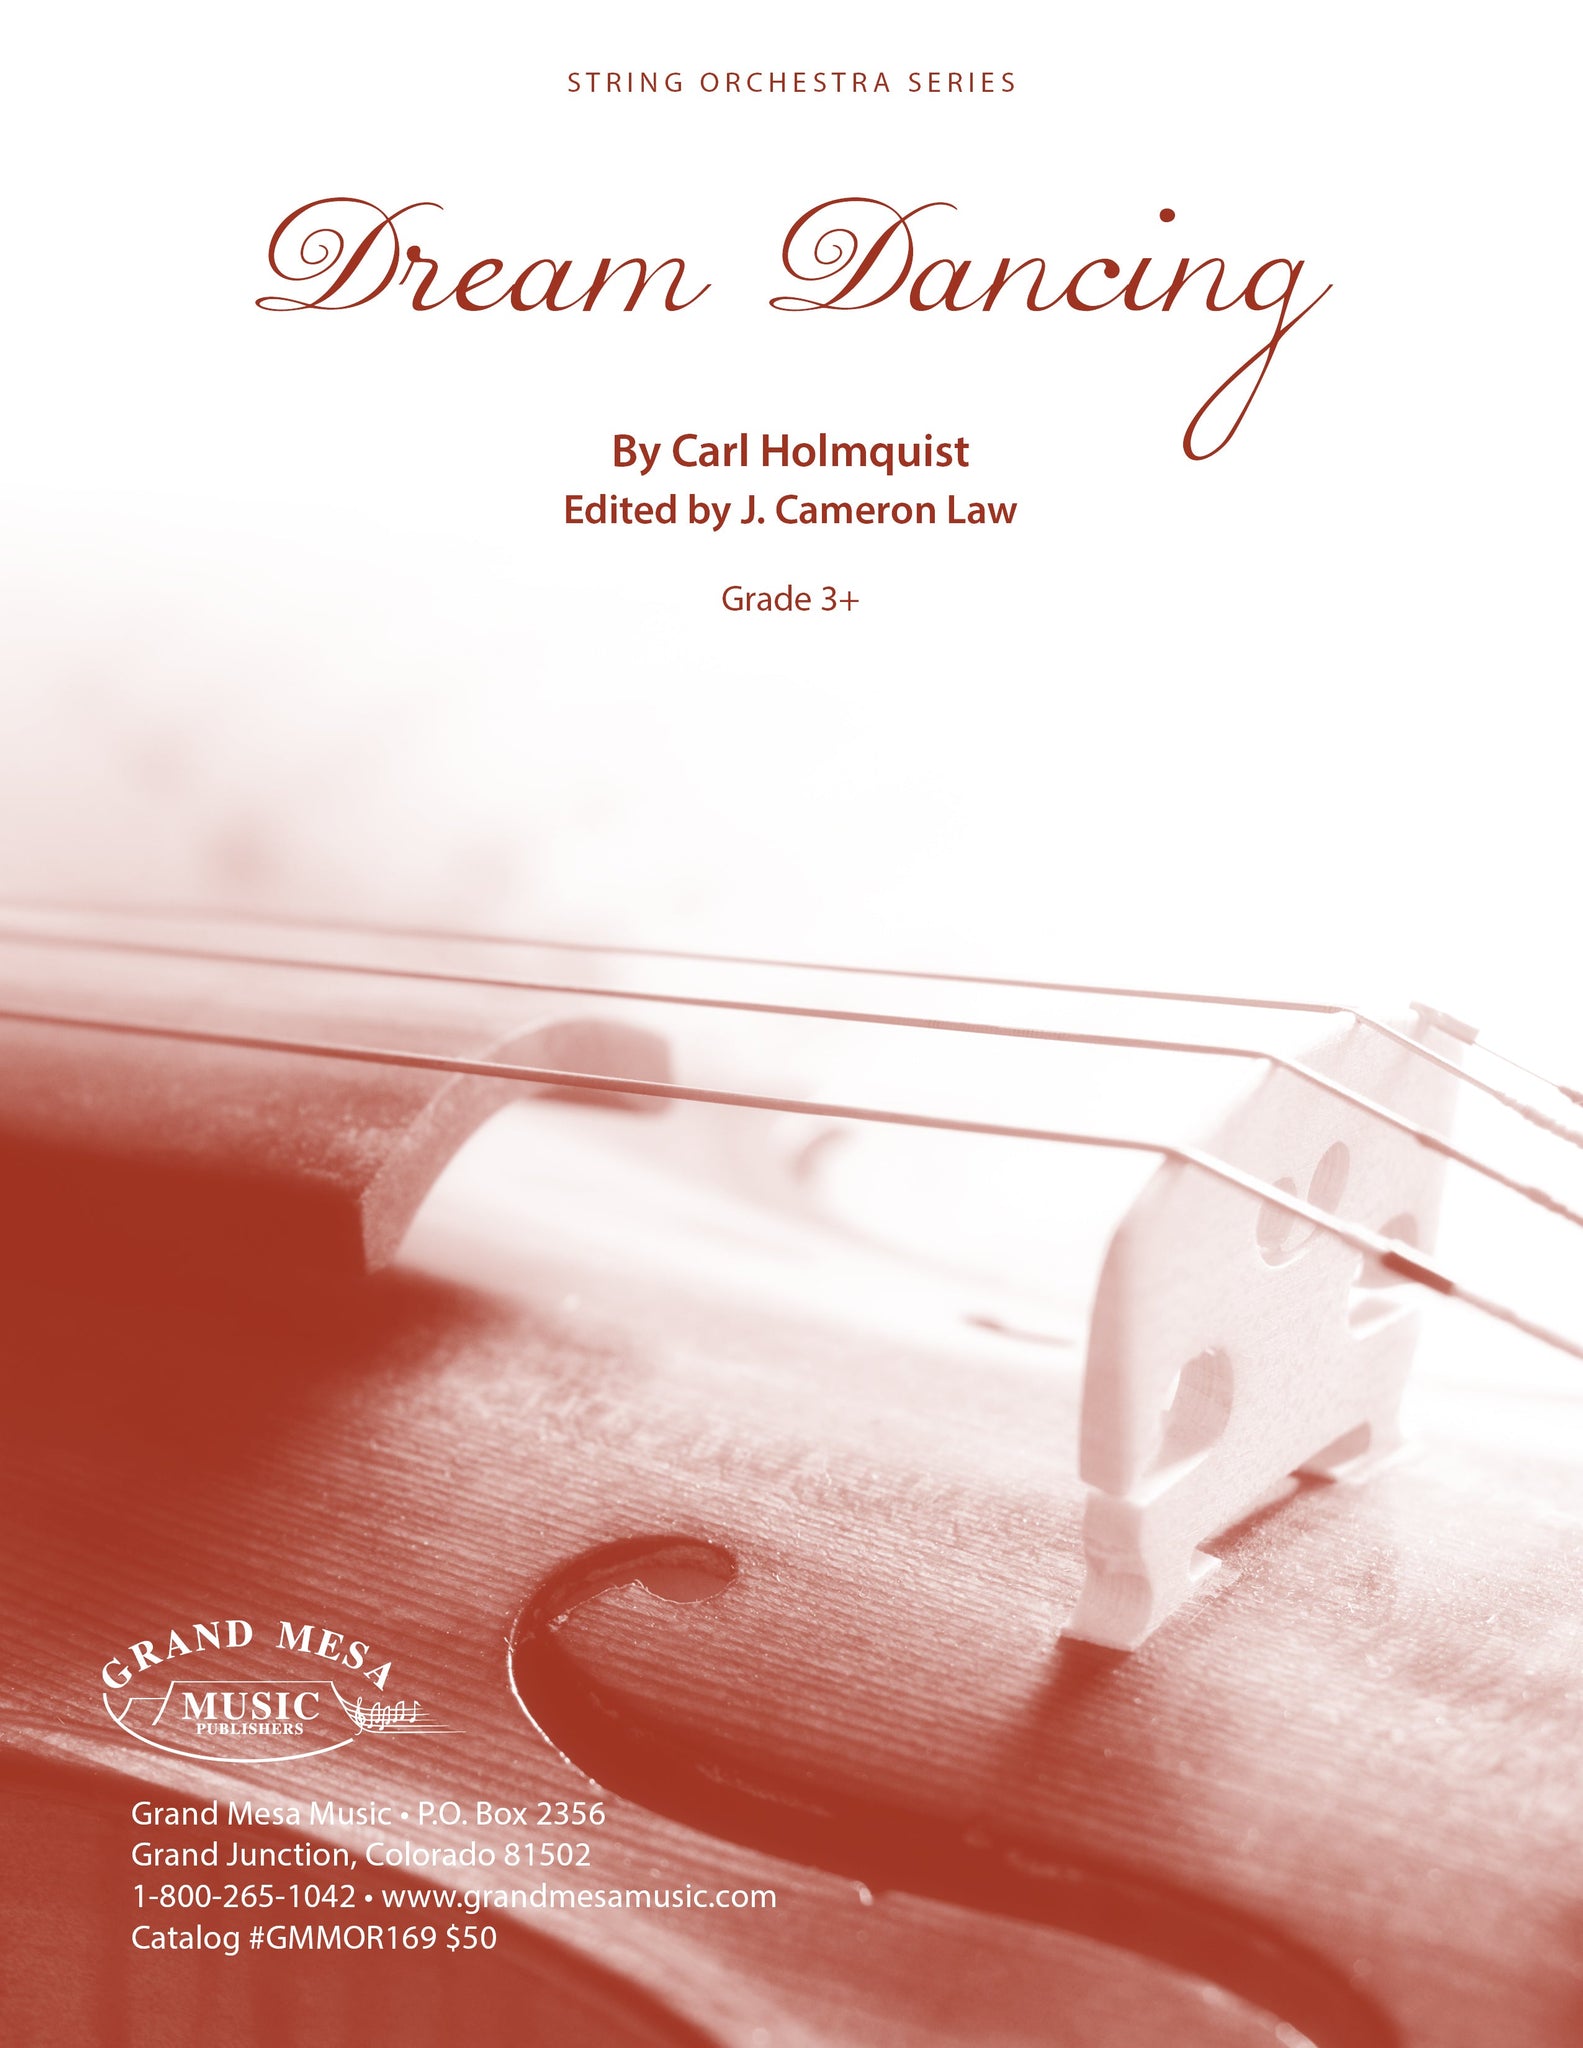 Strings sheet music cover of Dream Dancing, composed by Carl Holmquist.